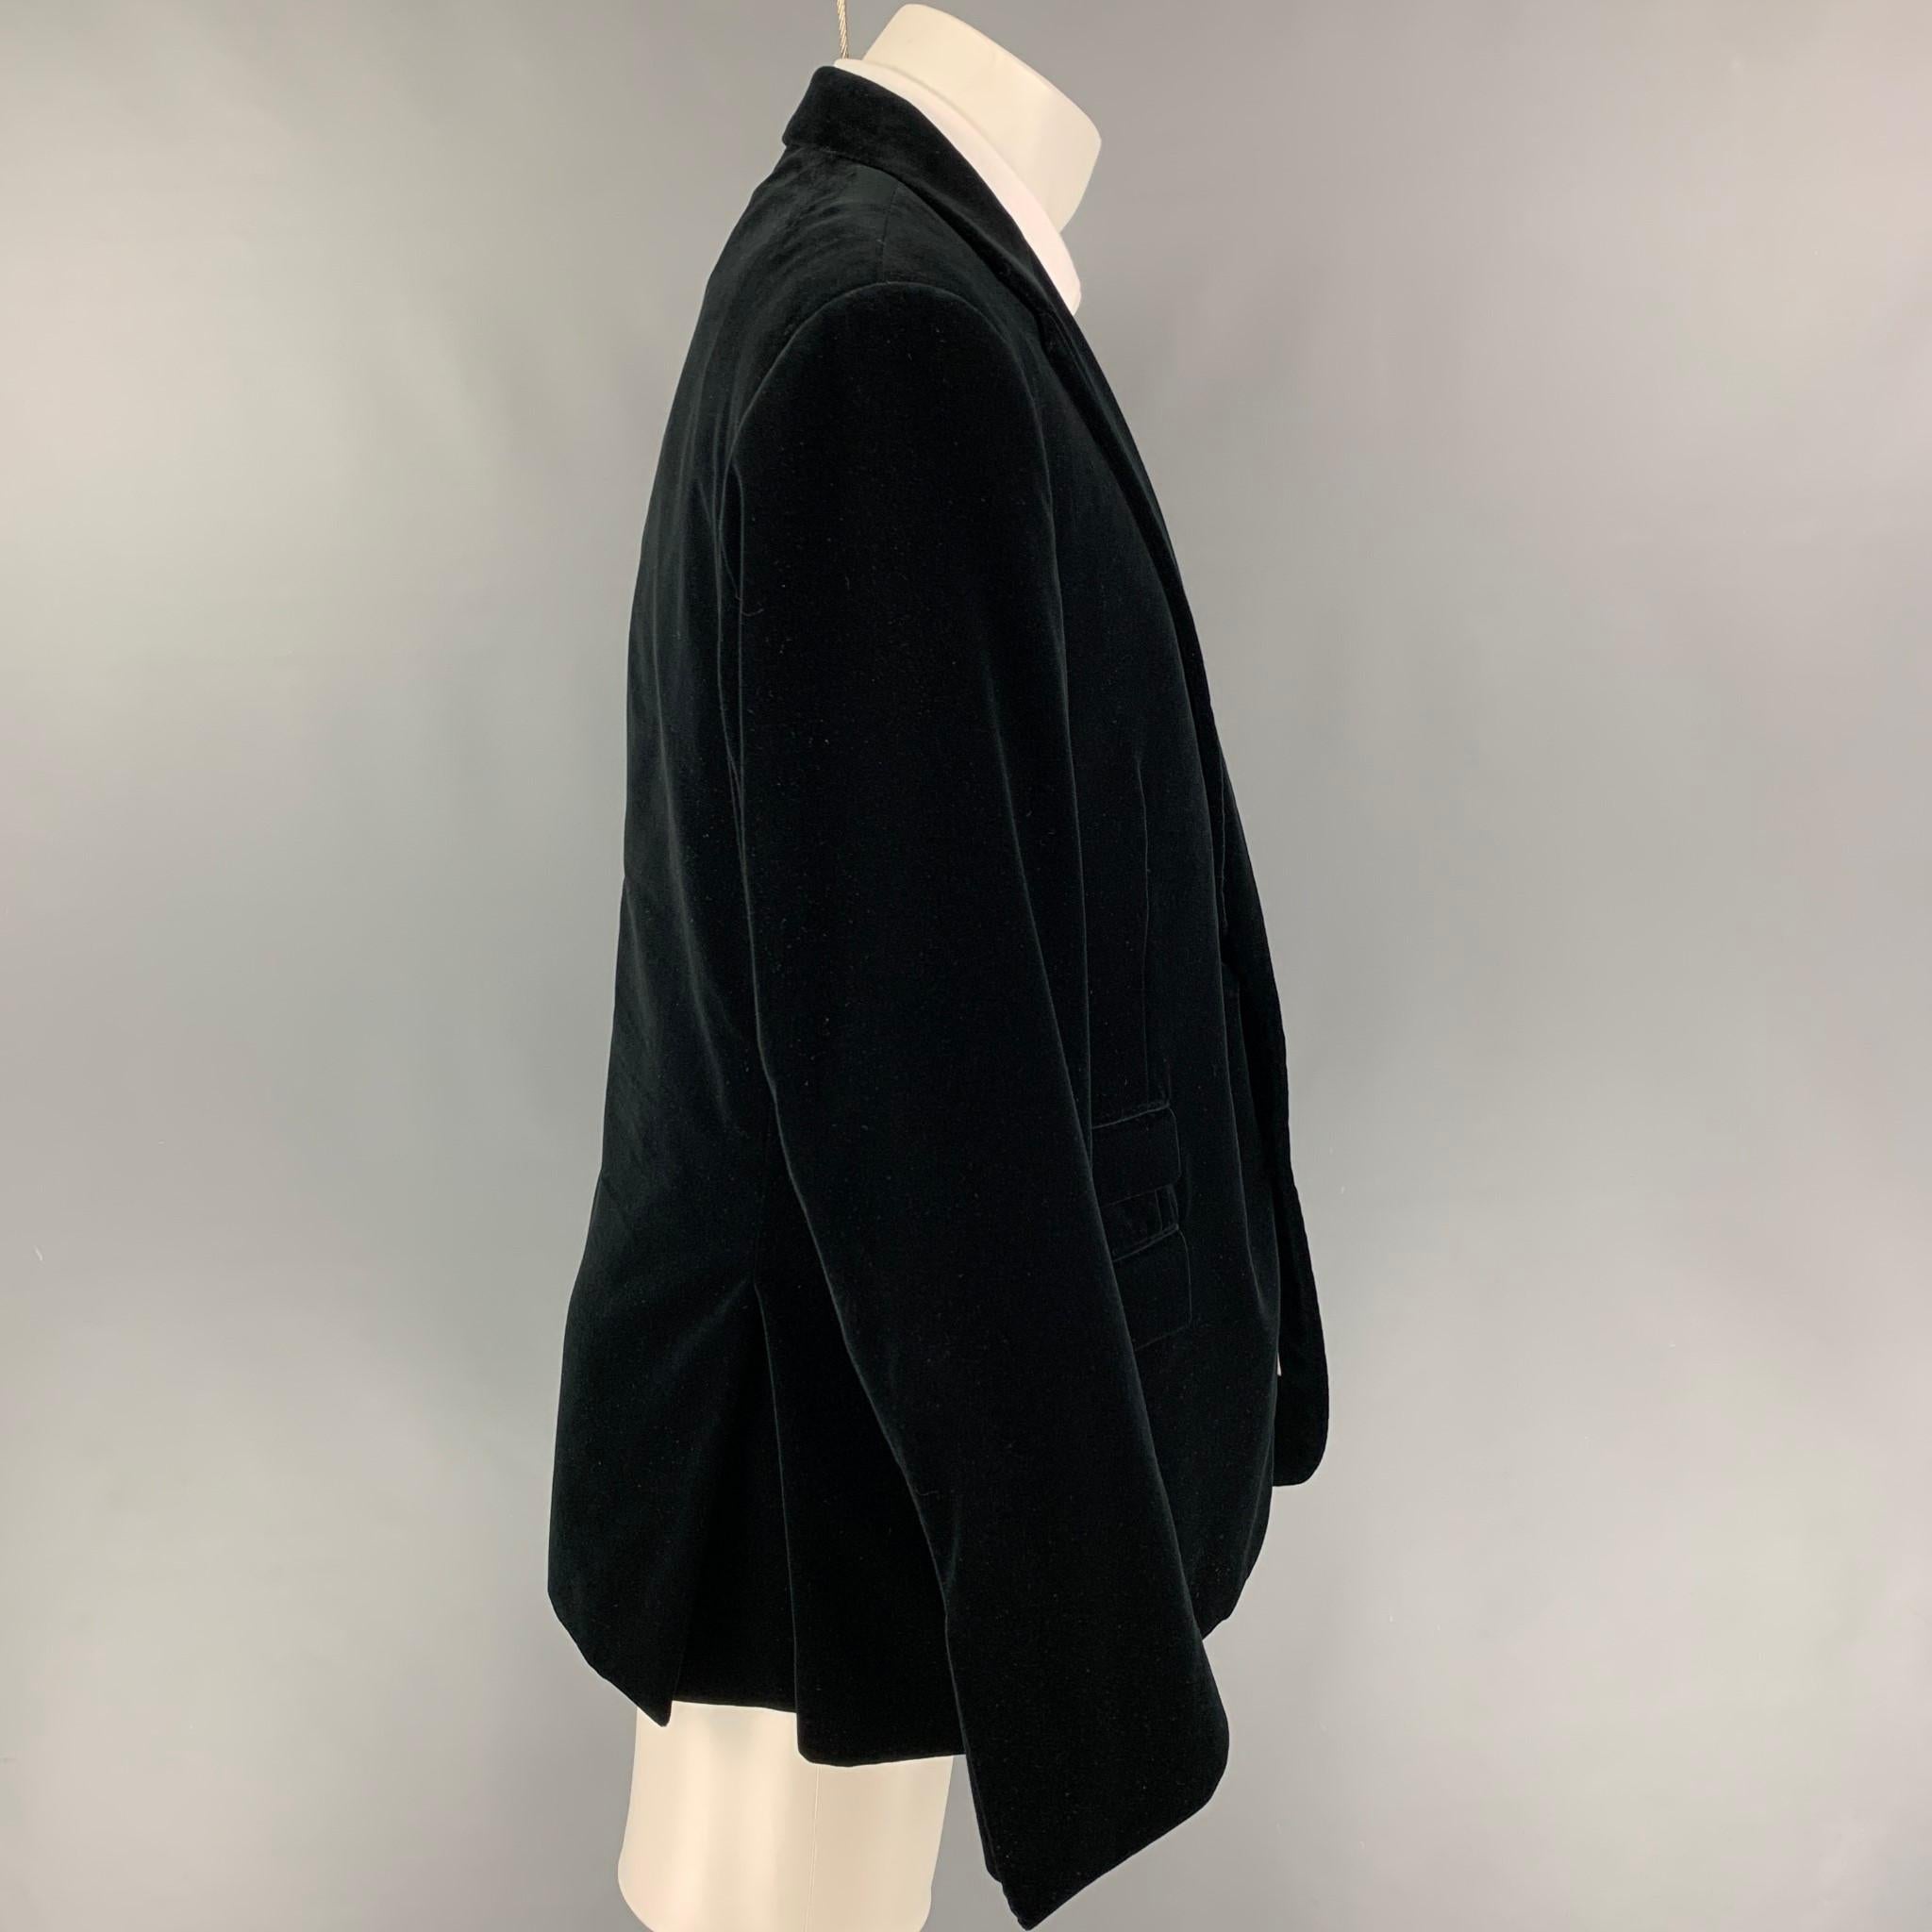 RALPH LAUREN 'Purple Label' custom fit sport coat comes in a black velvet with a full liner featuring a notch lapel, flap pockets, double back vent, and a double button closure. Made in Italy. 

Very Good Pre-Owned Condition.
Marked: 48